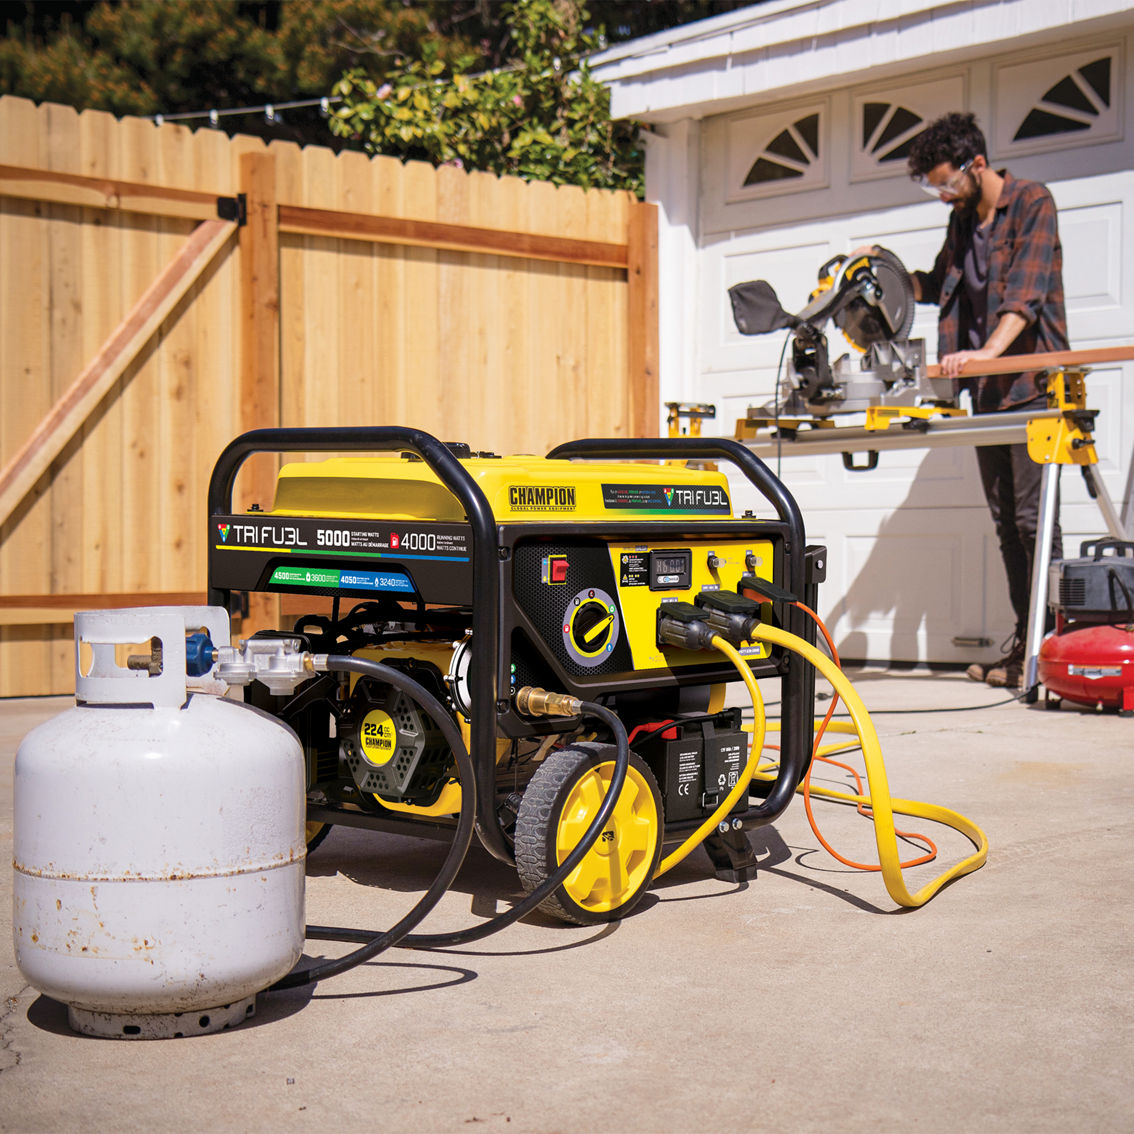 Champion 4000-Watt Tri Fuel Portable Natural Gas Generator with Electric Start - Image 2 of 10